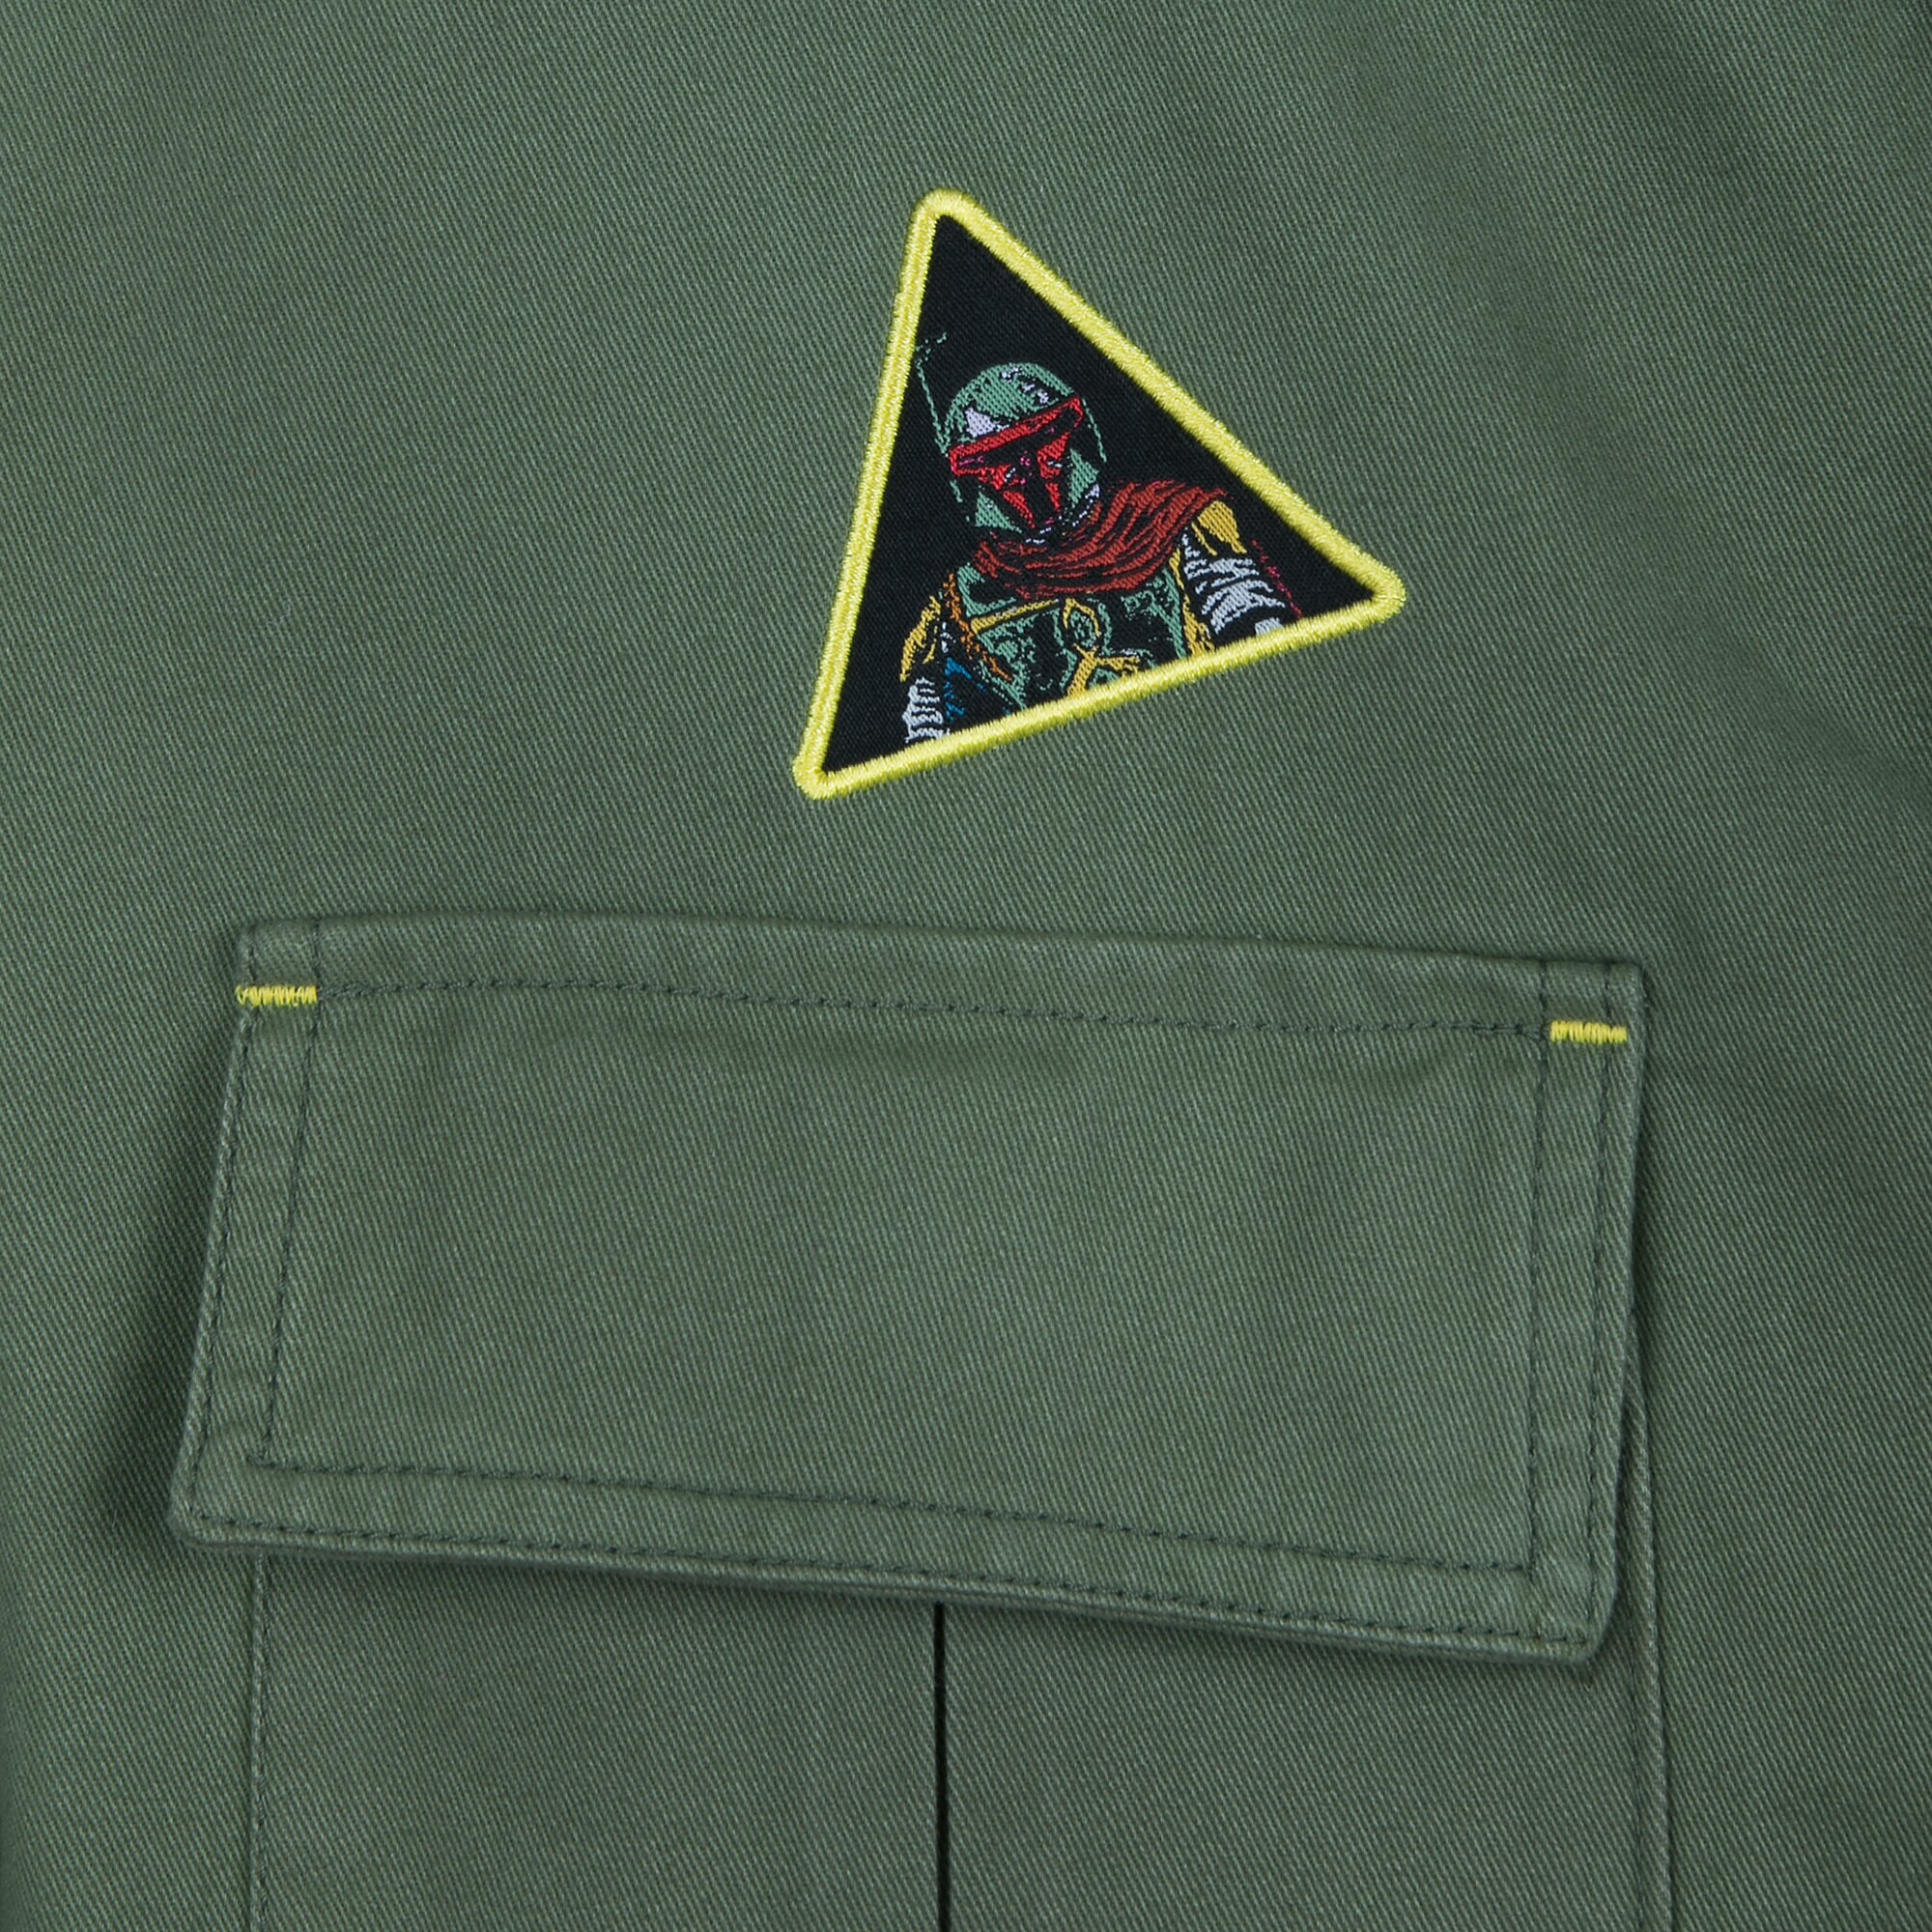 Boba Fett Military Jacket for Adults - Star Wars